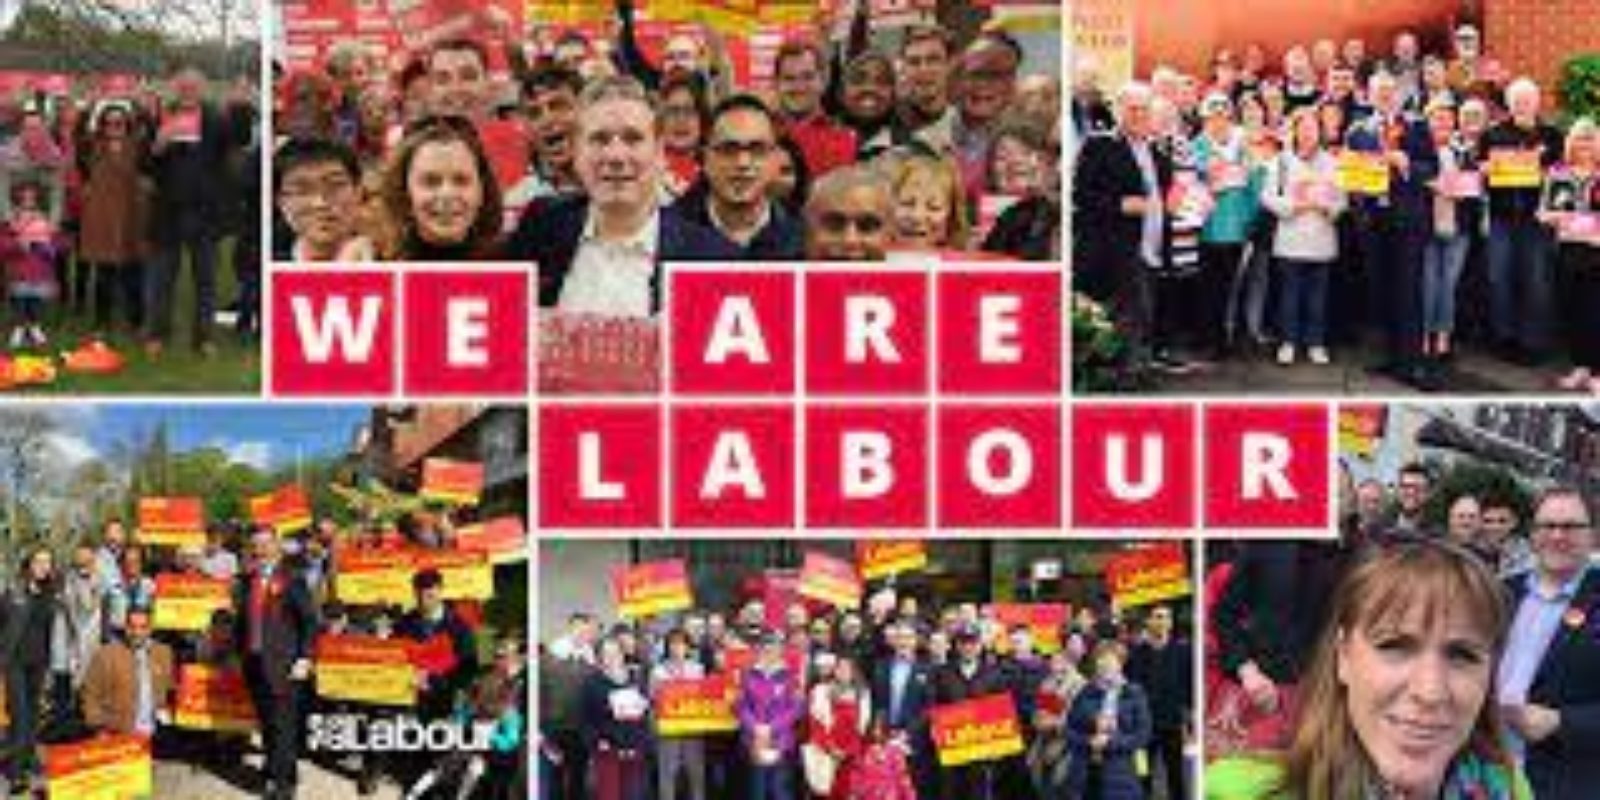 We are Labour